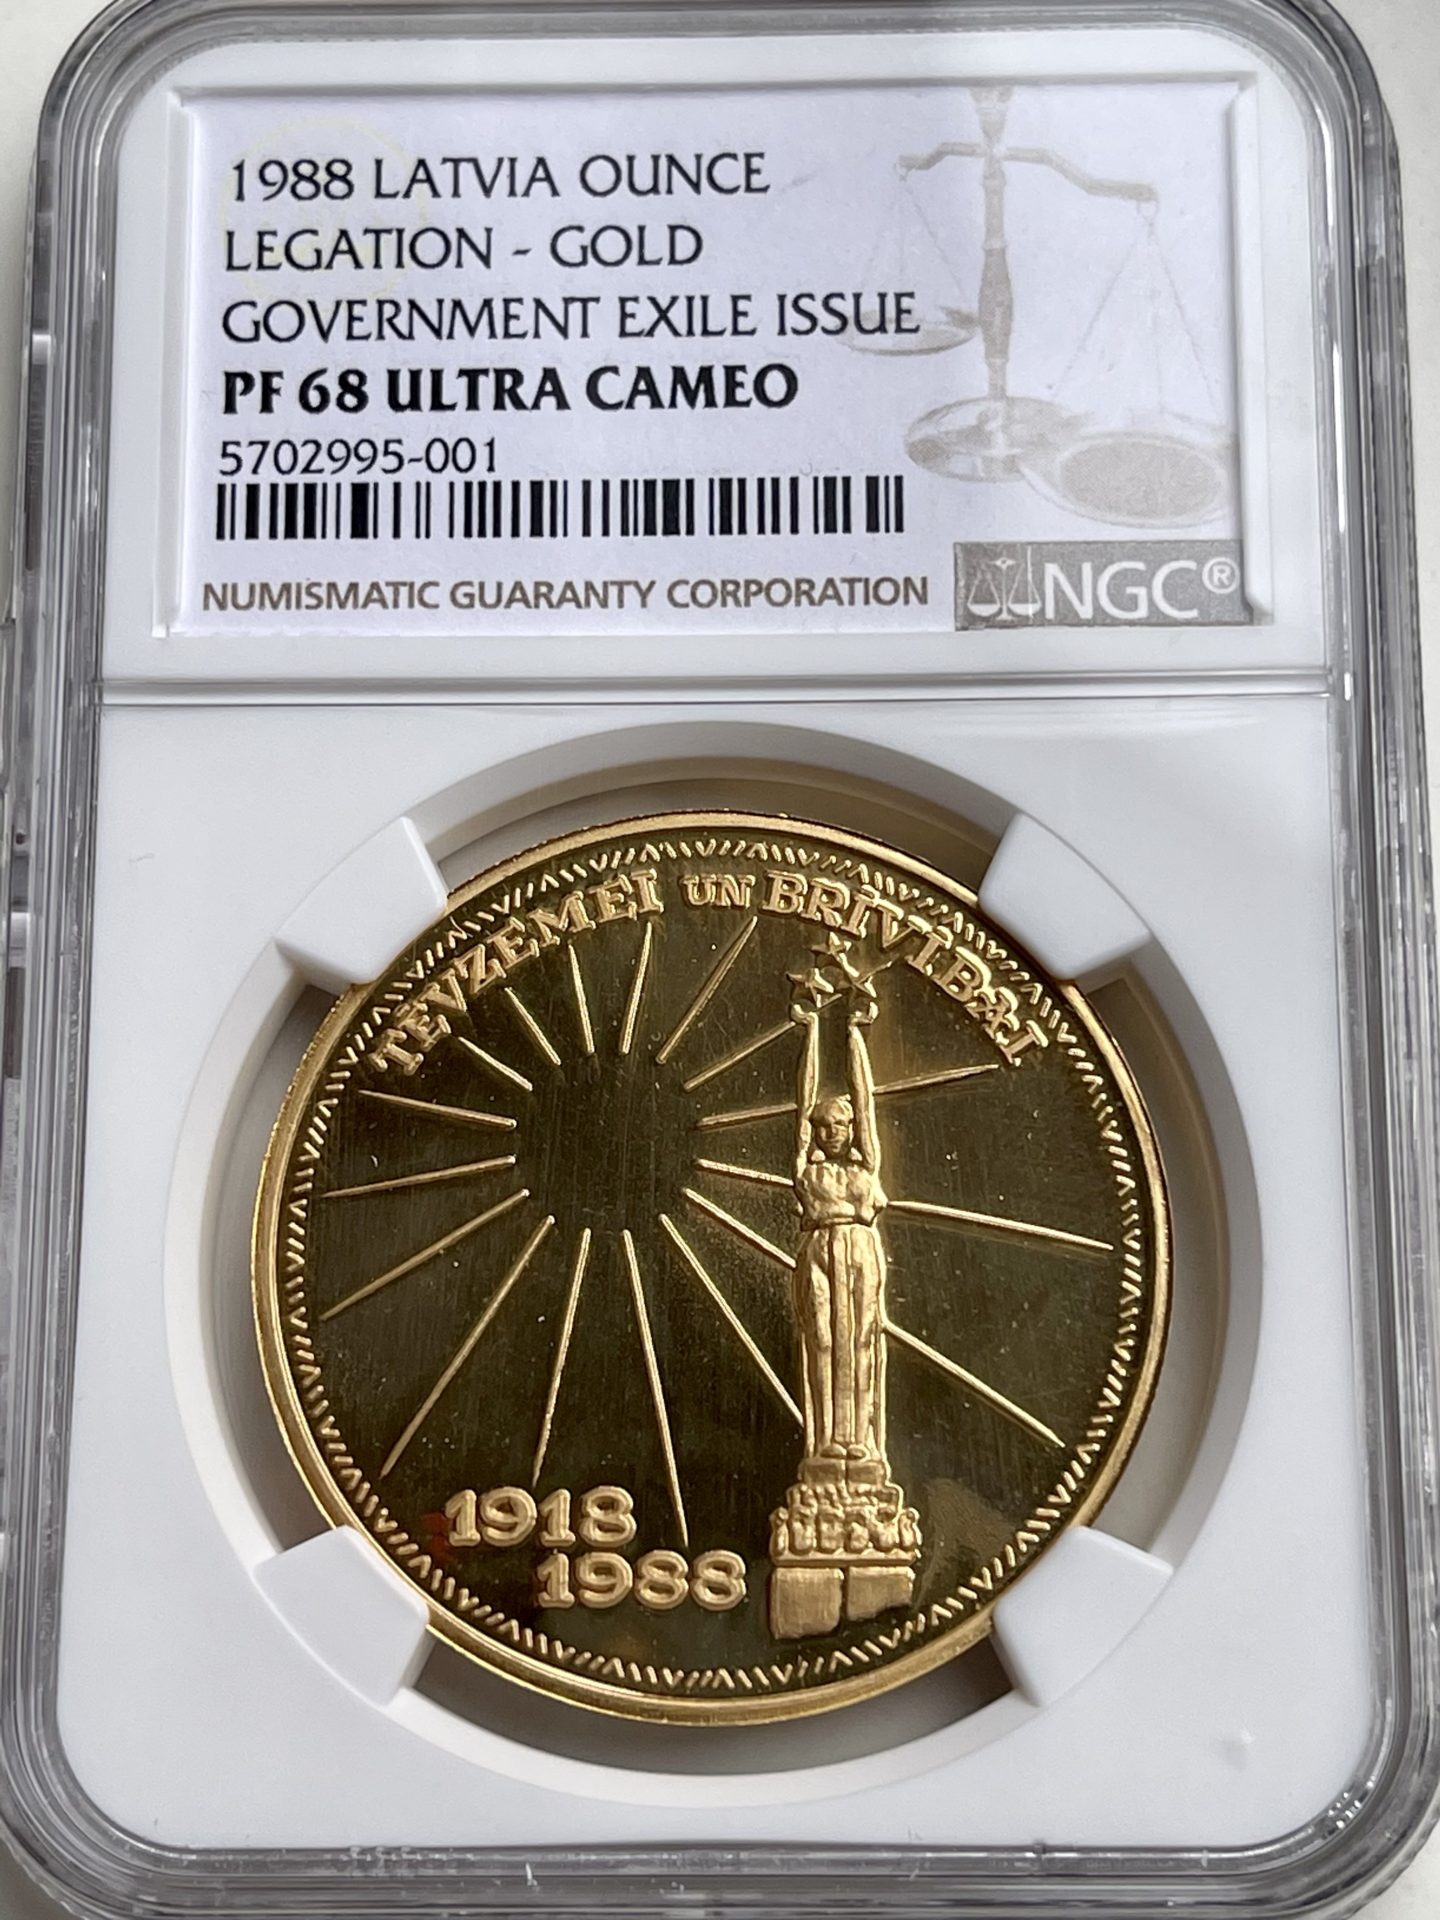 Latvia 1988 exile 70 years independence ngc pf68 ultra cameo